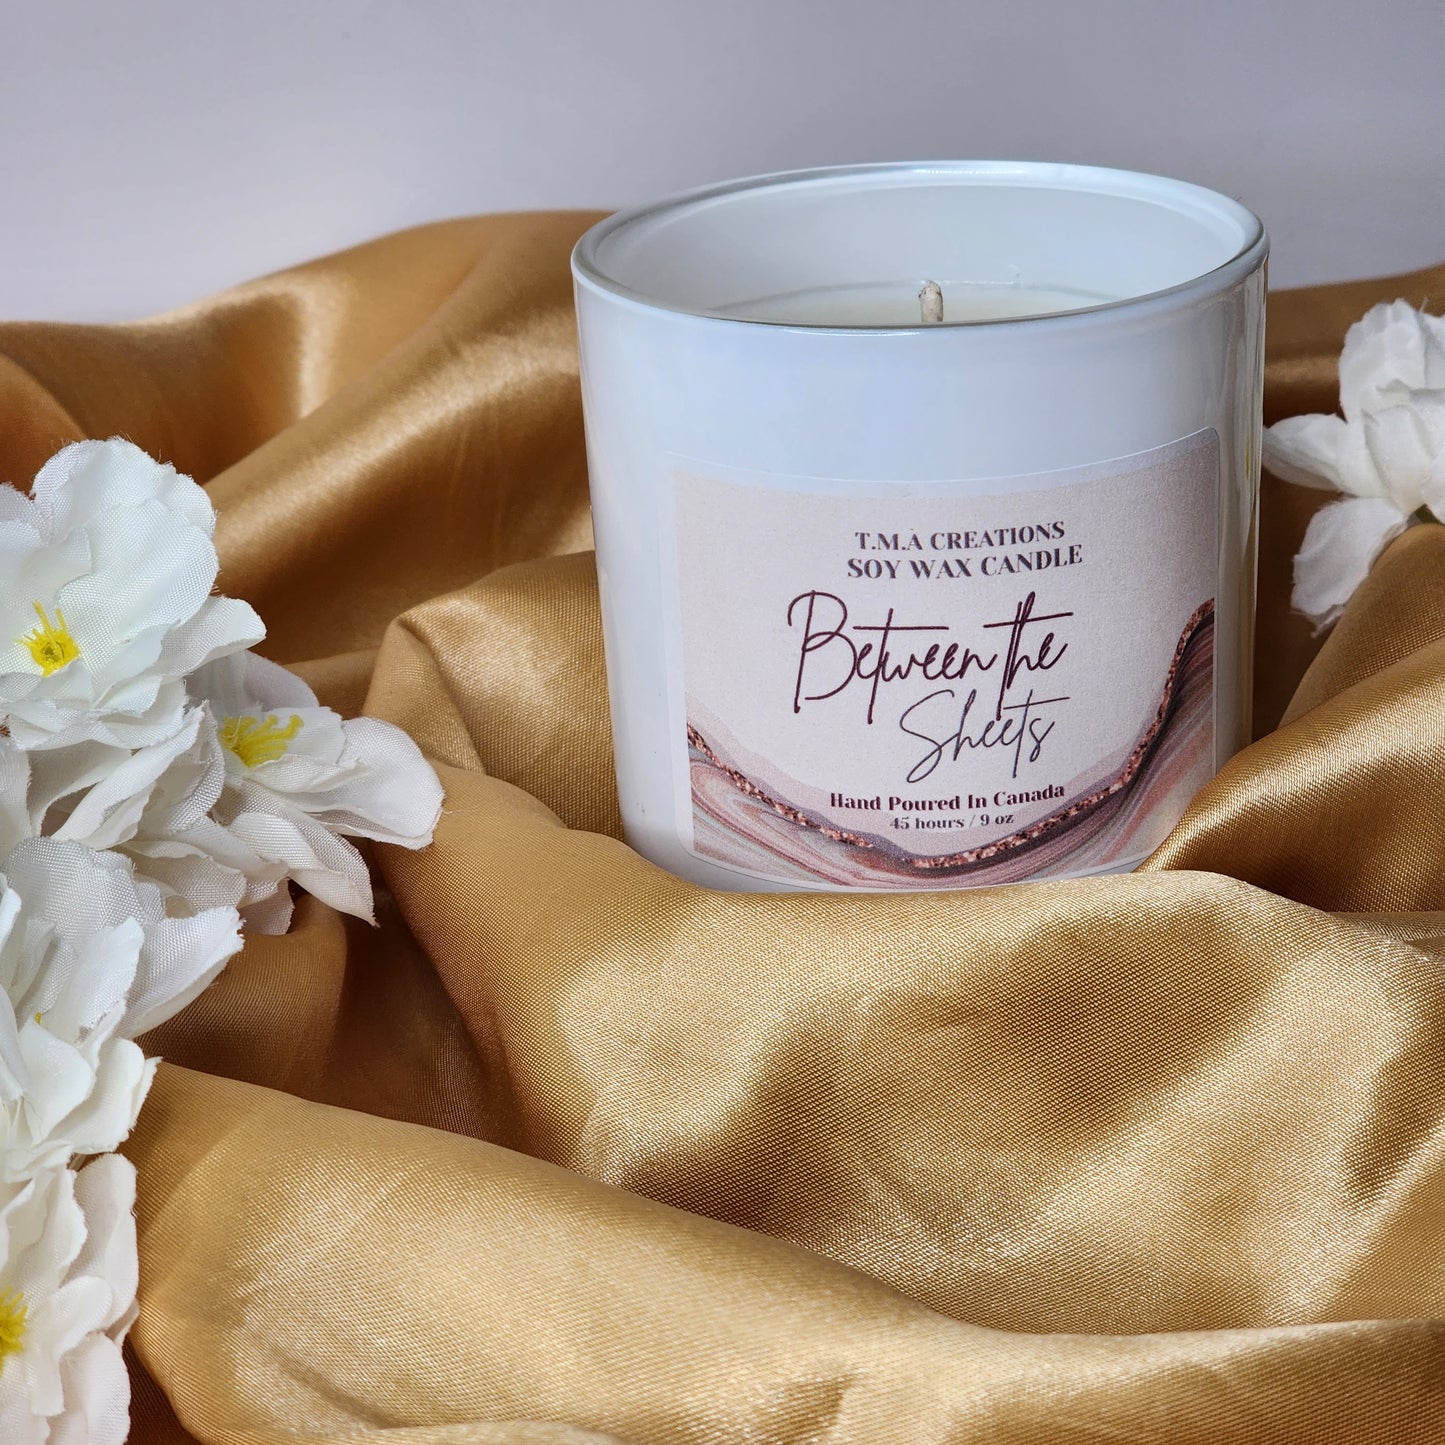 "Between the Sheets" Candle